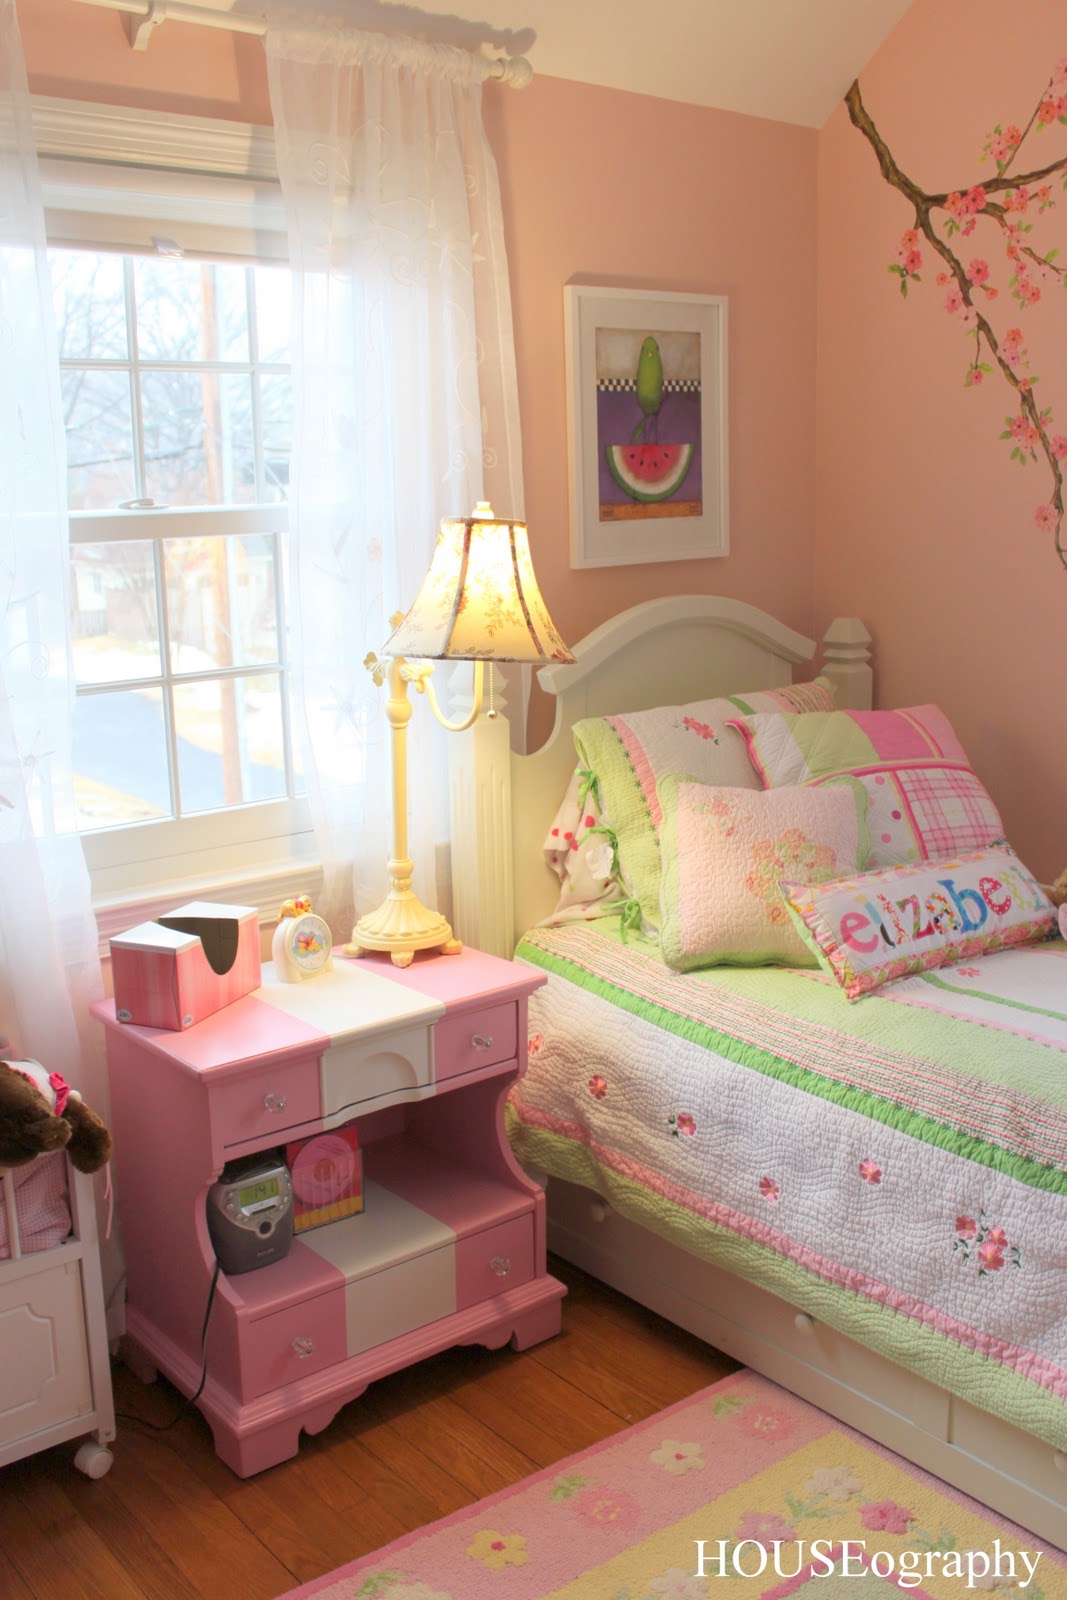 HOUSEography: Nightstand Makeover for a Little Girl - FINALLY